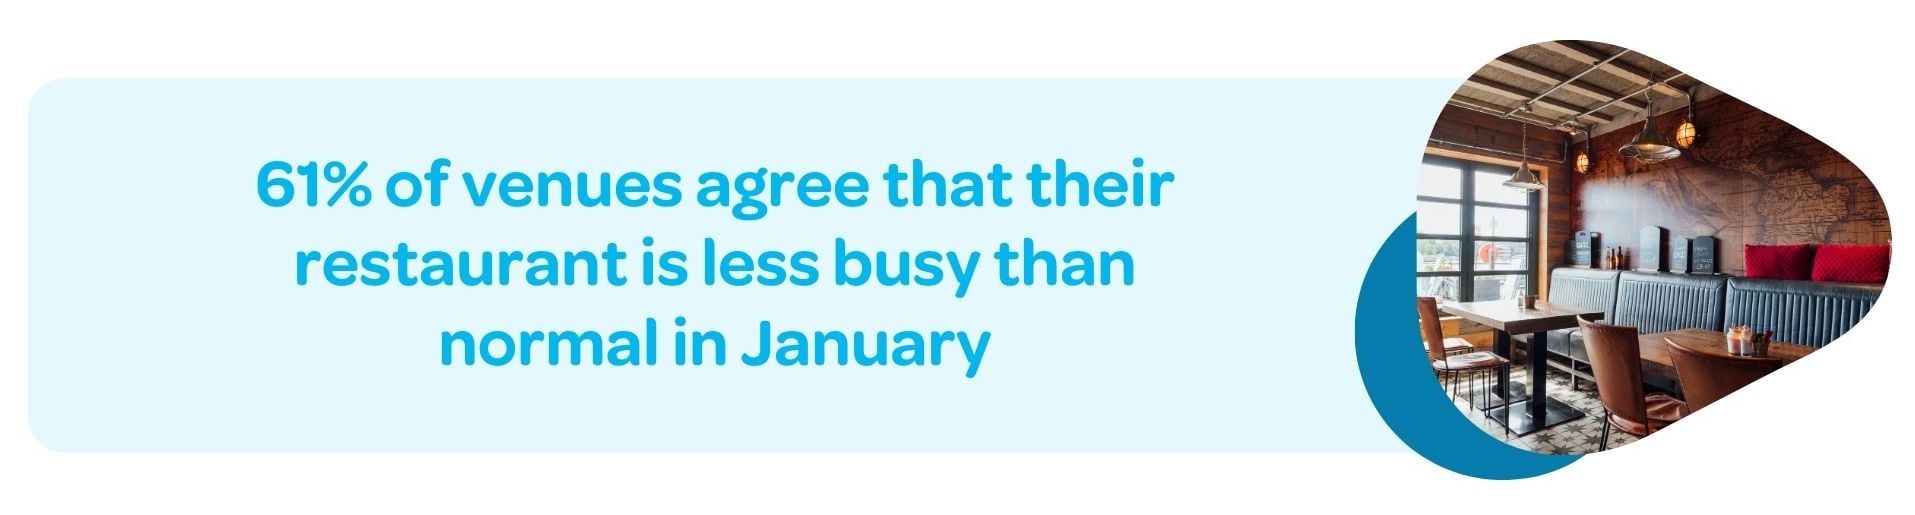 61% of venues agree that their restaurant is less busy than normal in January